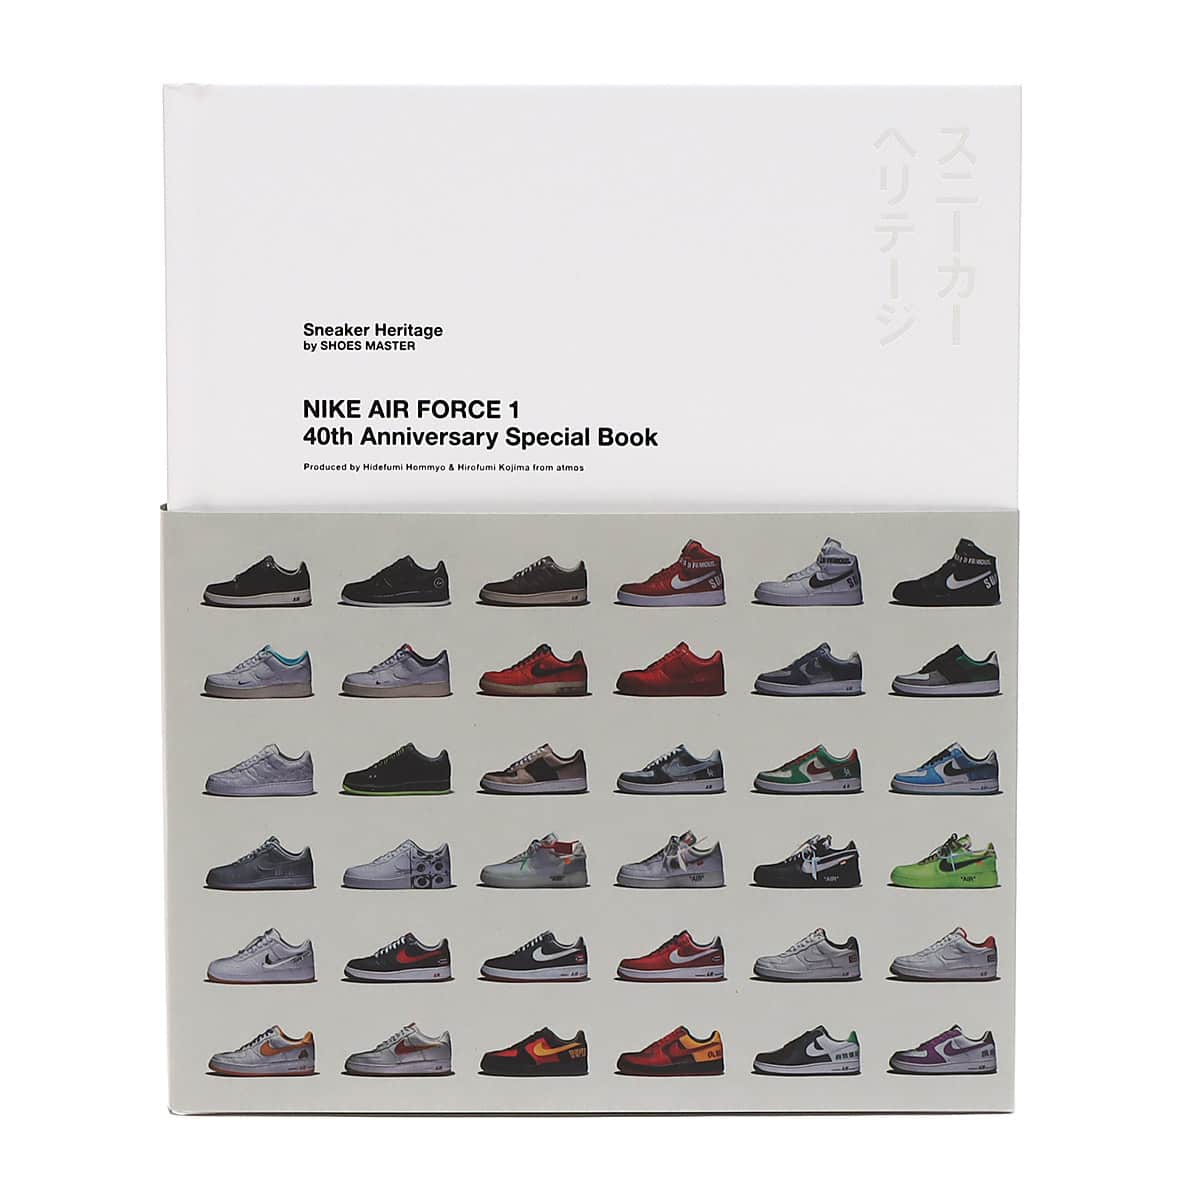 Sneaker Heritage by SHOES MASTER "NIKE AIR FORCE 1 40th